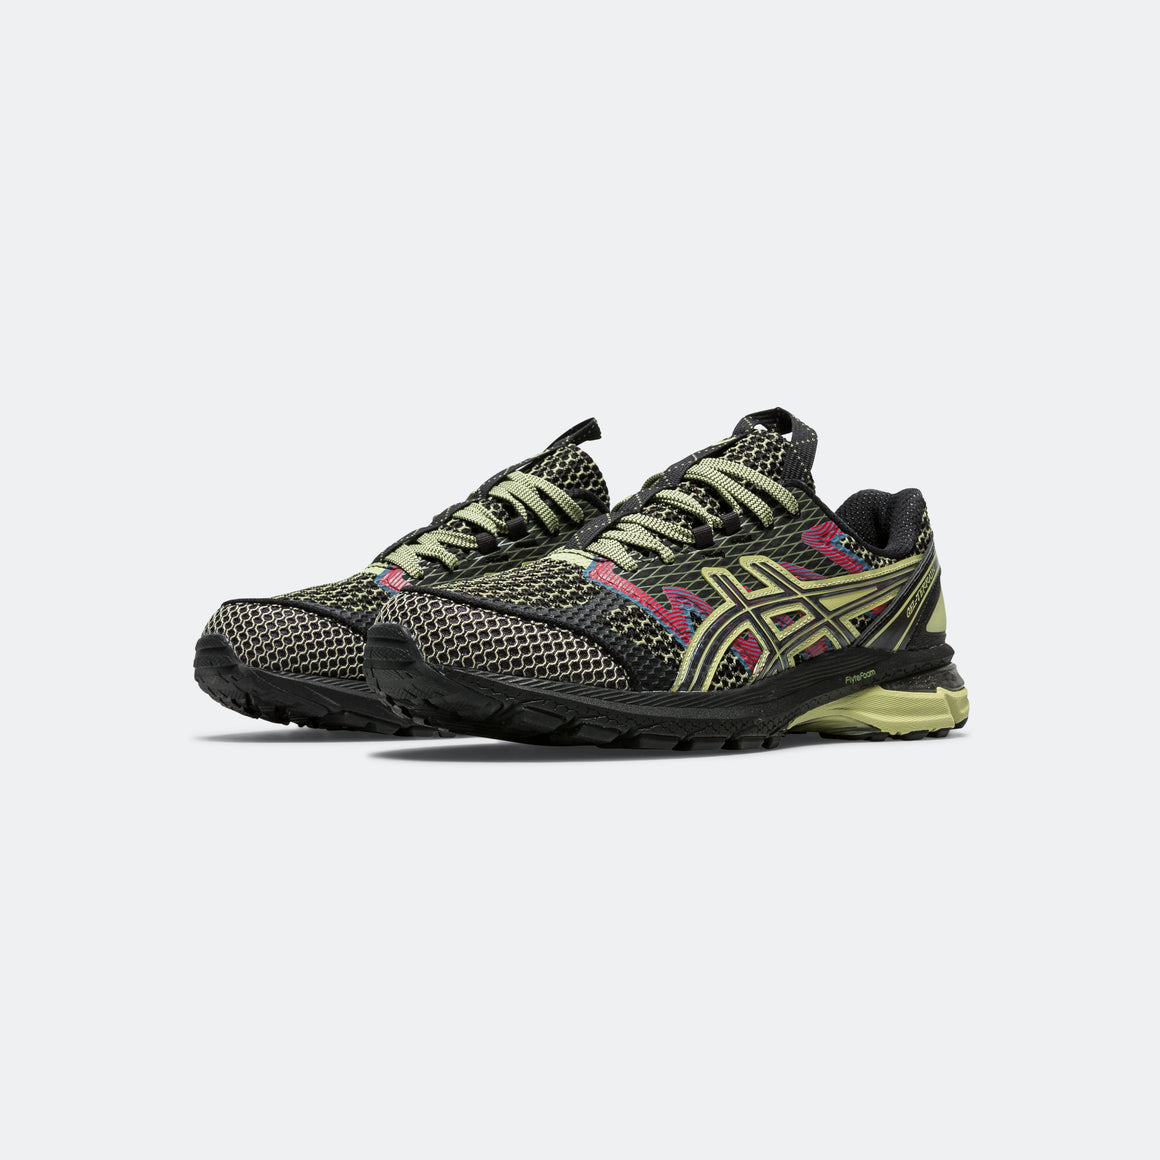 Asics - US4-S GEL-TERRAIN - Black/Neon Lime - UP THERE